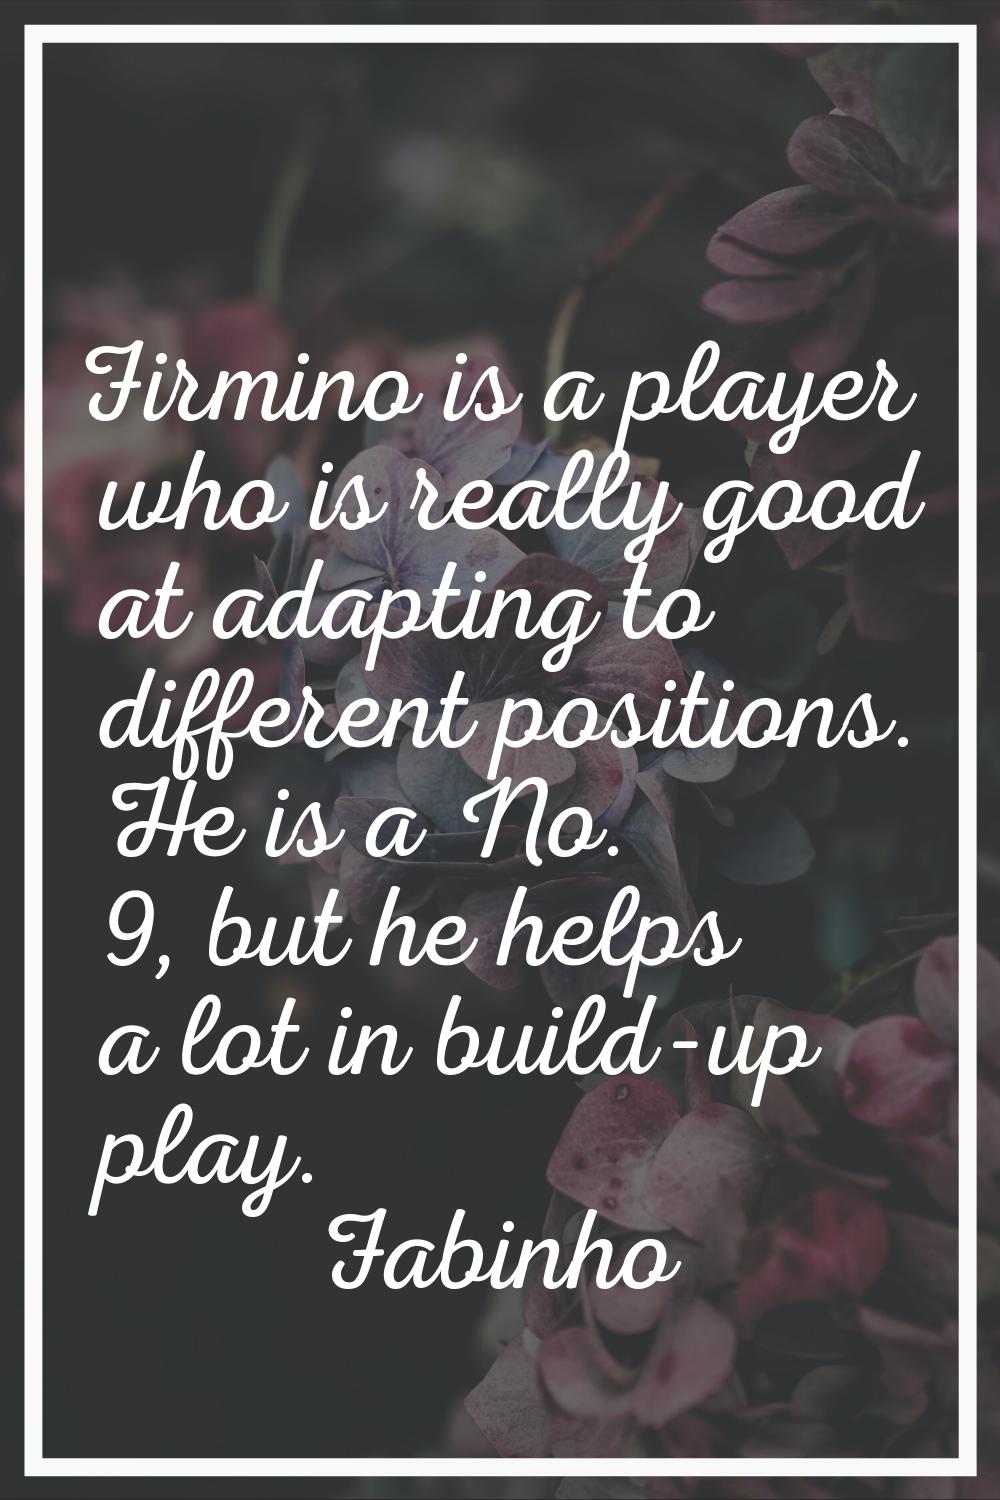 Firmino is a player who is really good at adapting to different positions. He is a No. 9, but he he